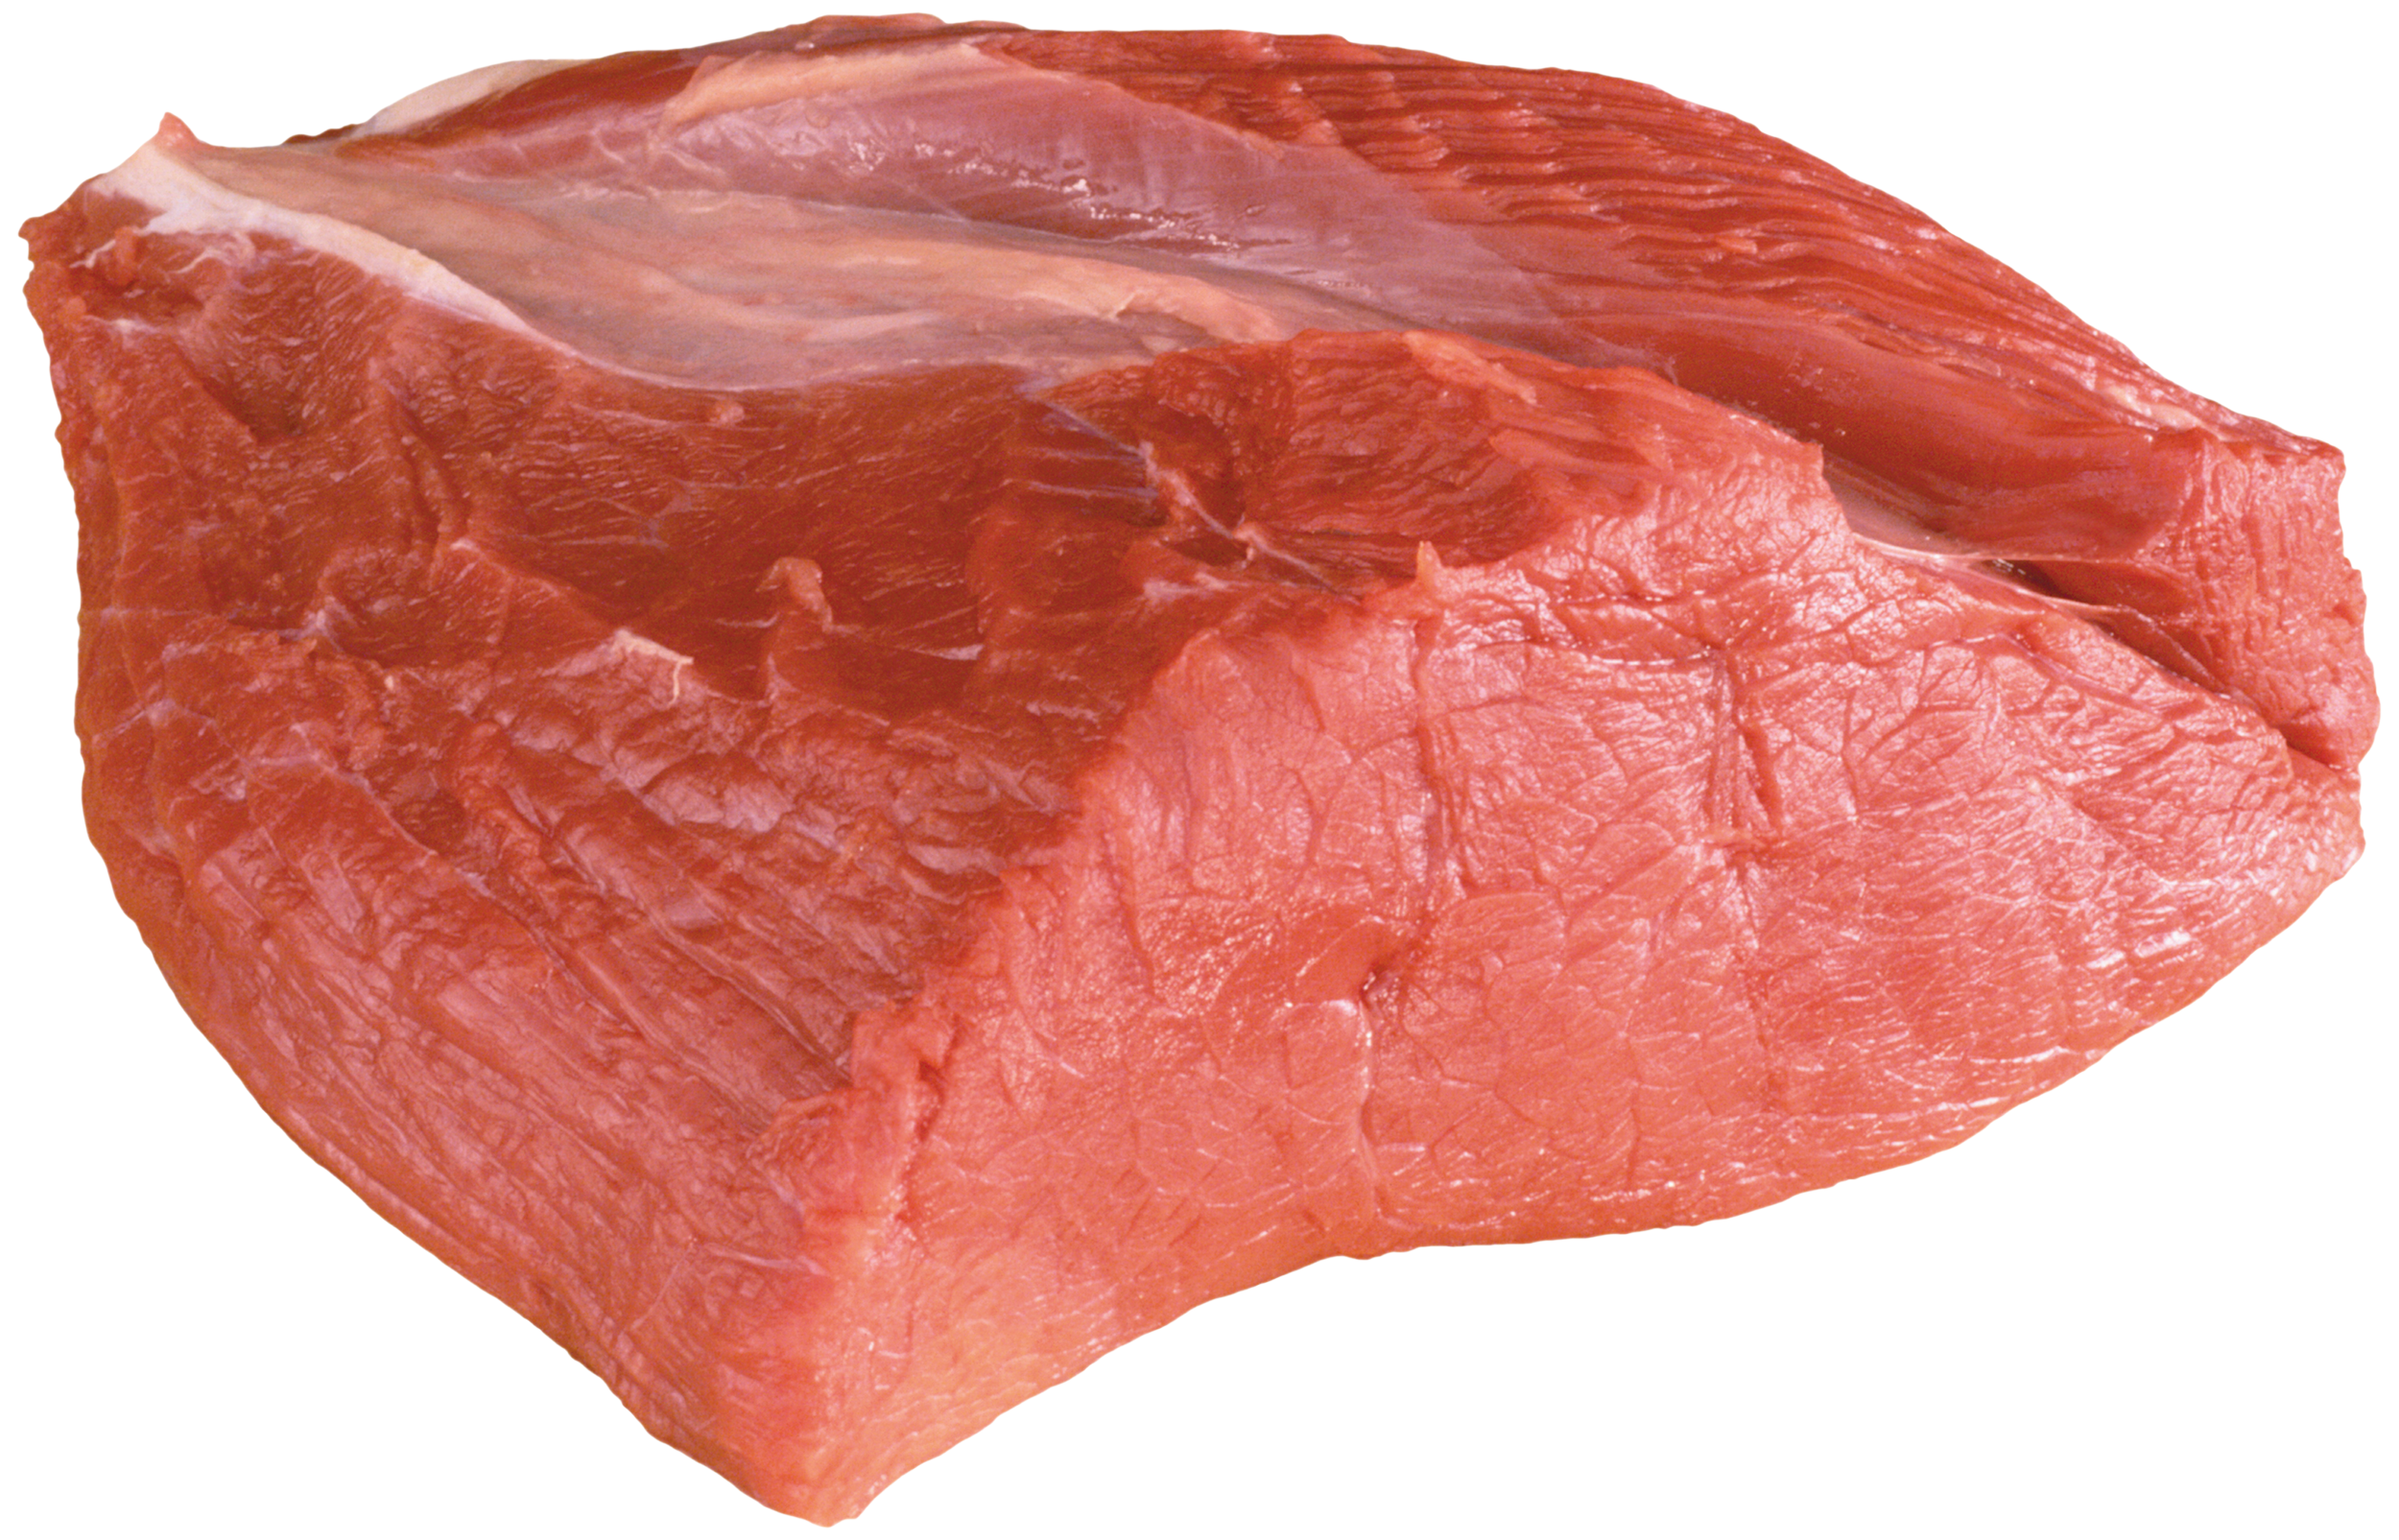 raw meat clipart - photo #50